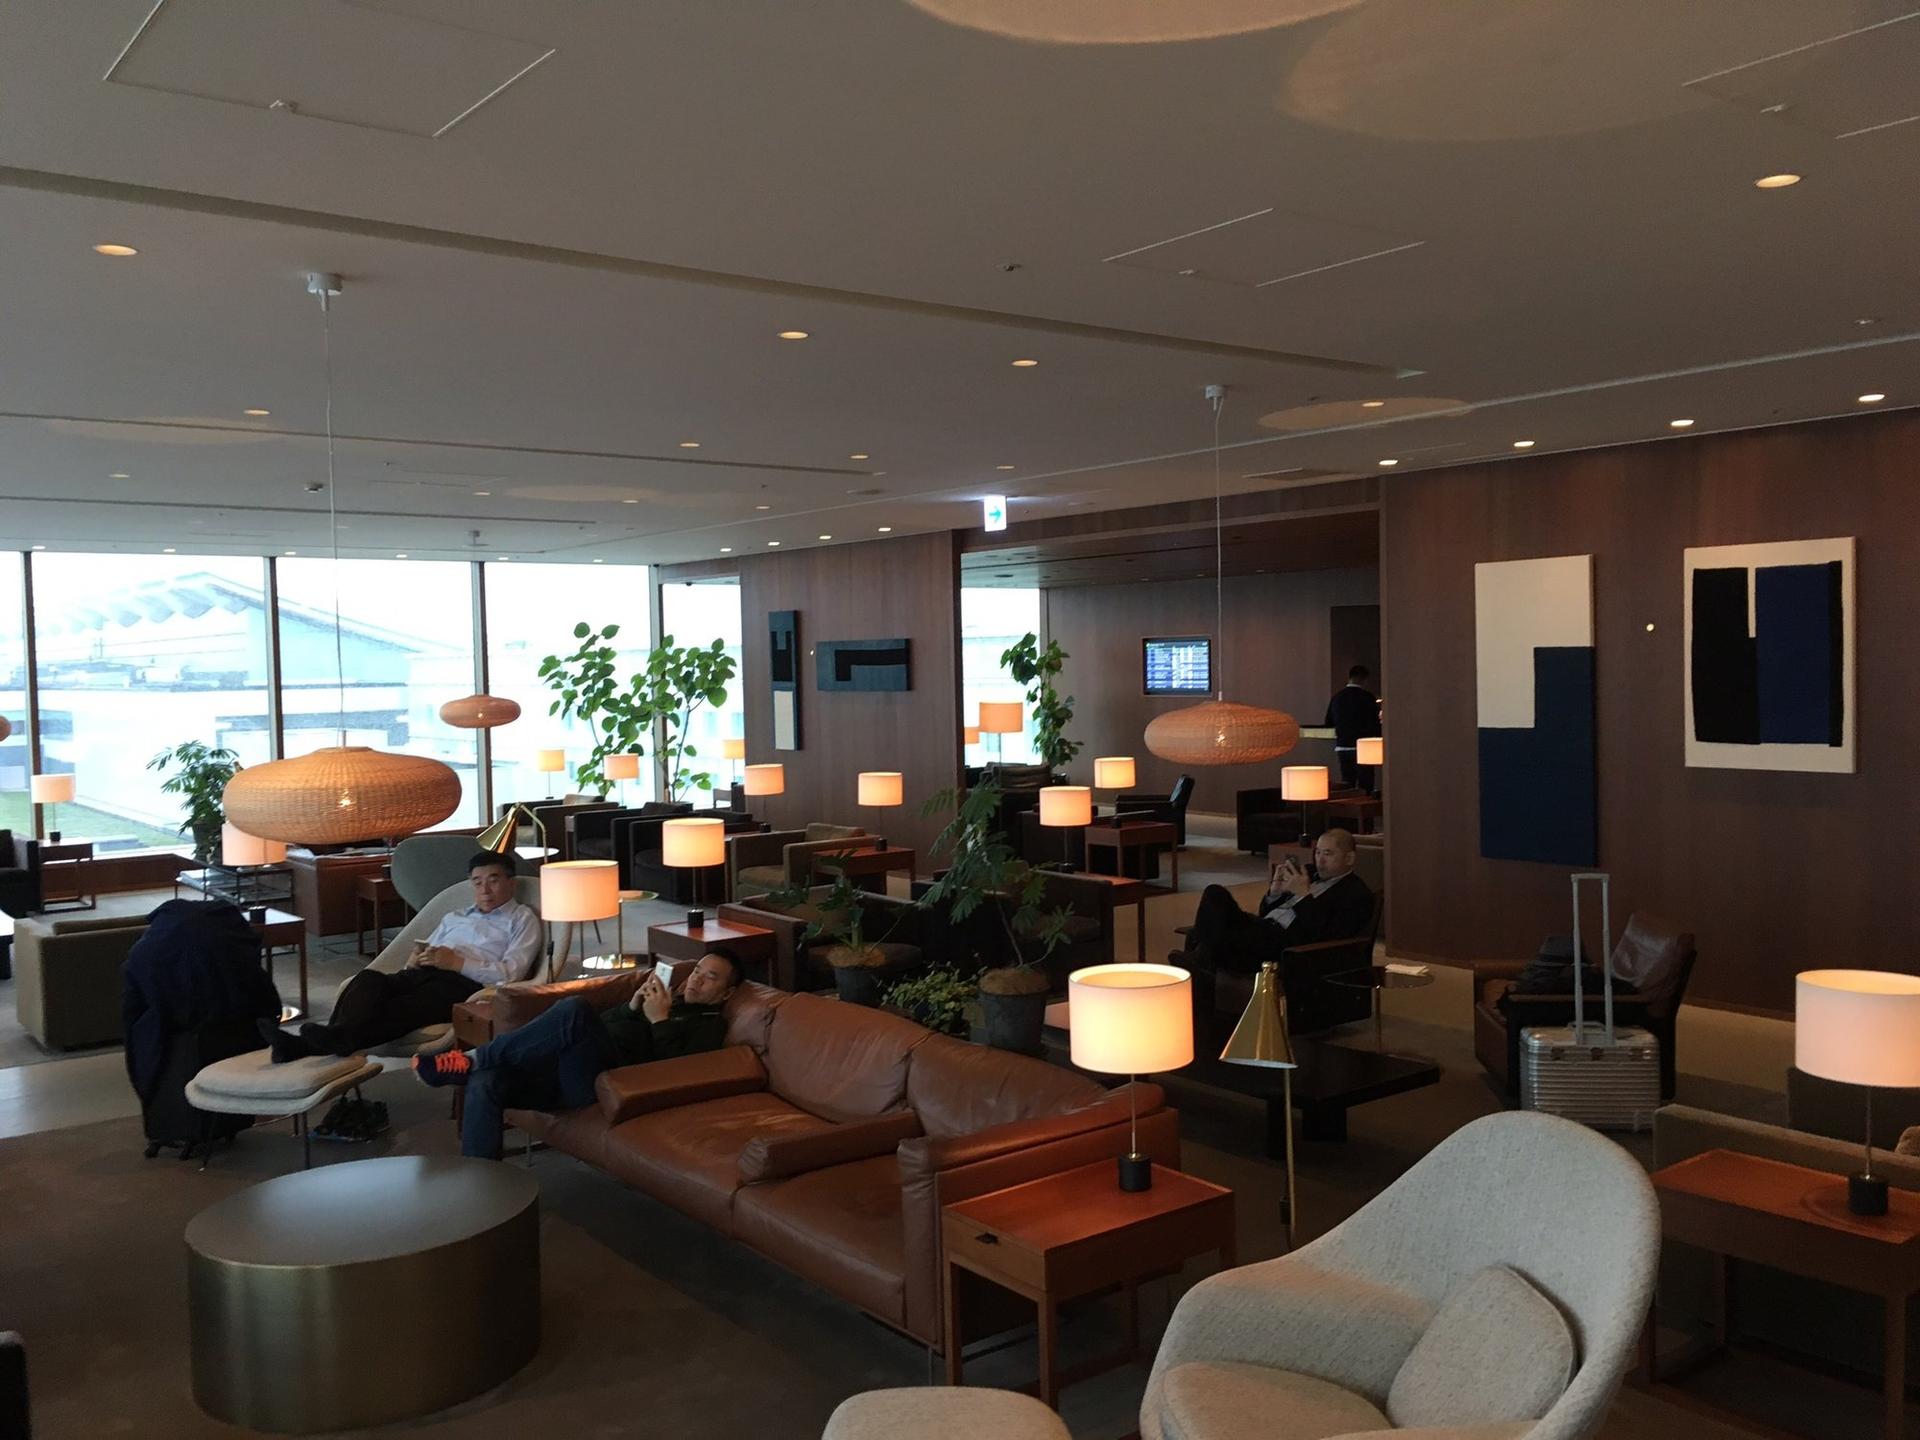 Cathay Pacific Lounge image 47 of 49